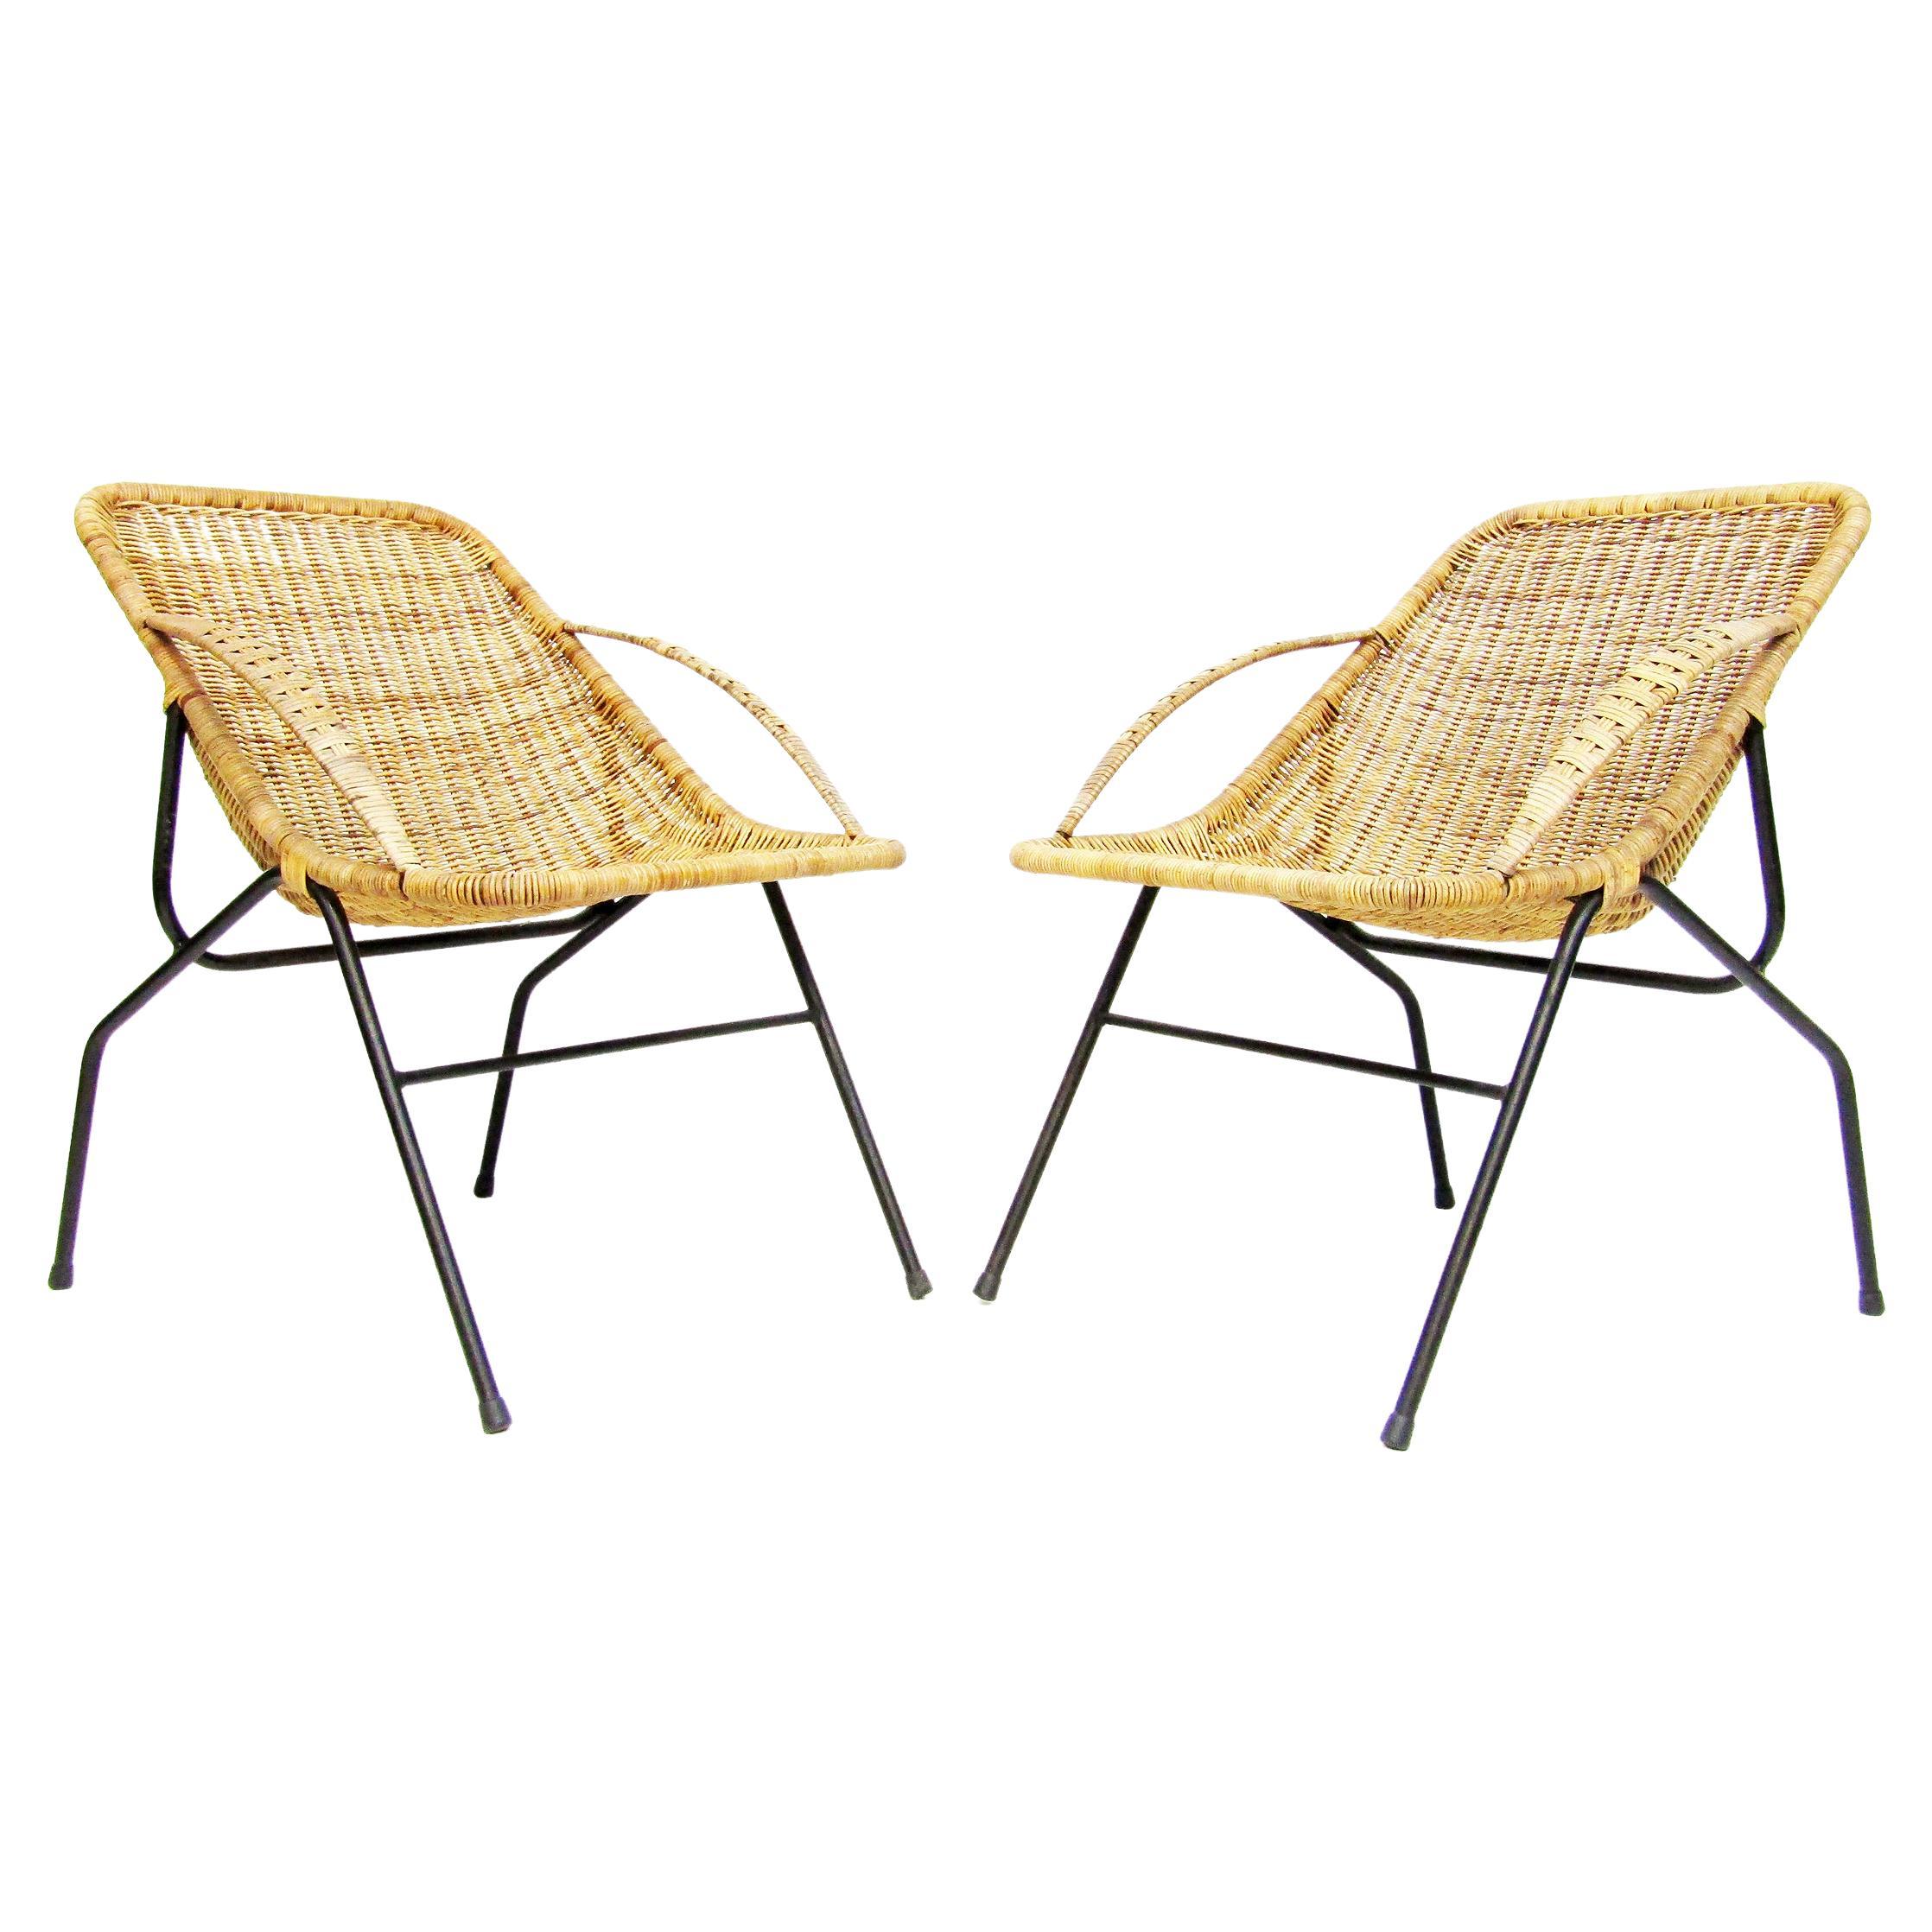 Pair of 1950s French "Gazelle" Chairs in Wicker & Steel, Style of Jacques Adnet For Sale